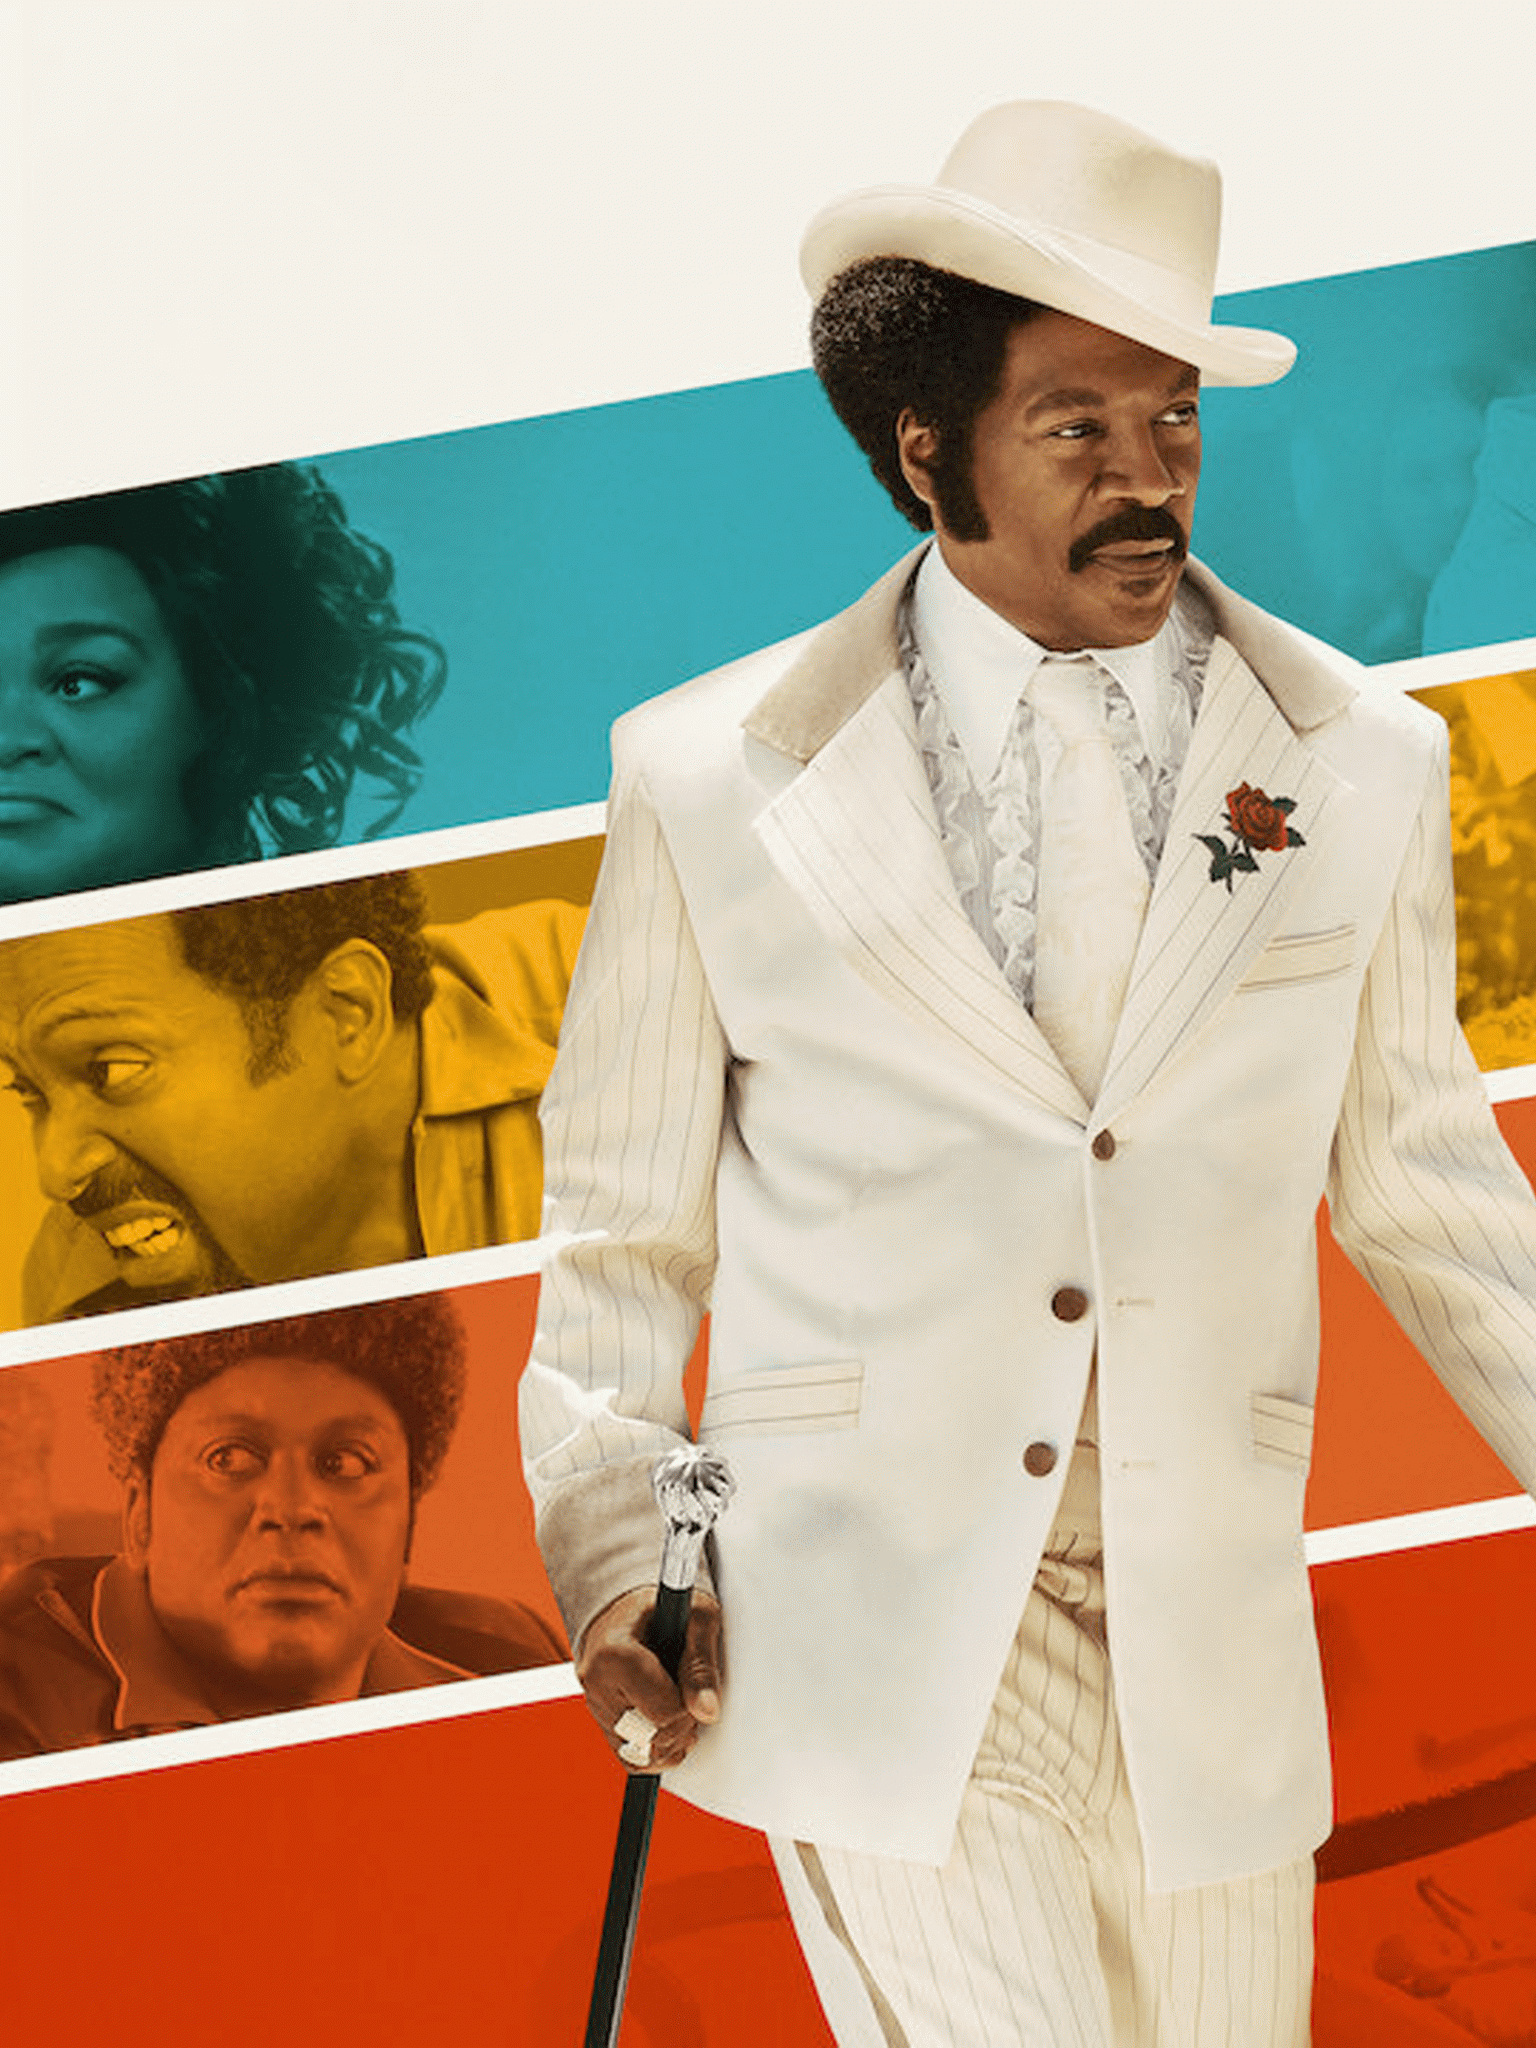 Dolemite Is My Name, Film stream guide, Little Monsters 2019, 4K resolution, 1540x2050 HD Handy